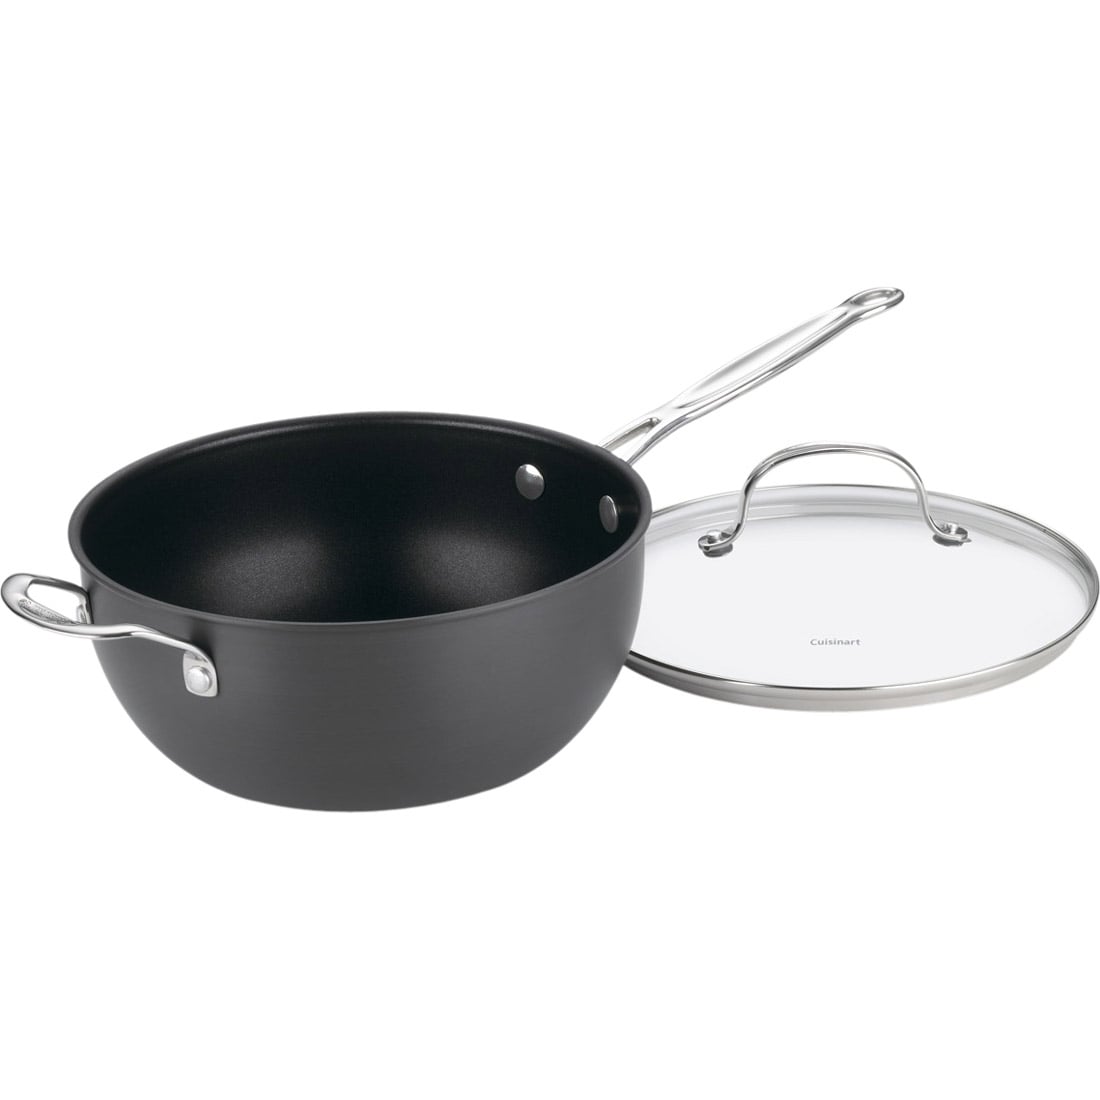 Cuisinart Chef's Classic Nonstick 1-Quart Hard-Anodized Saucepan with Cover